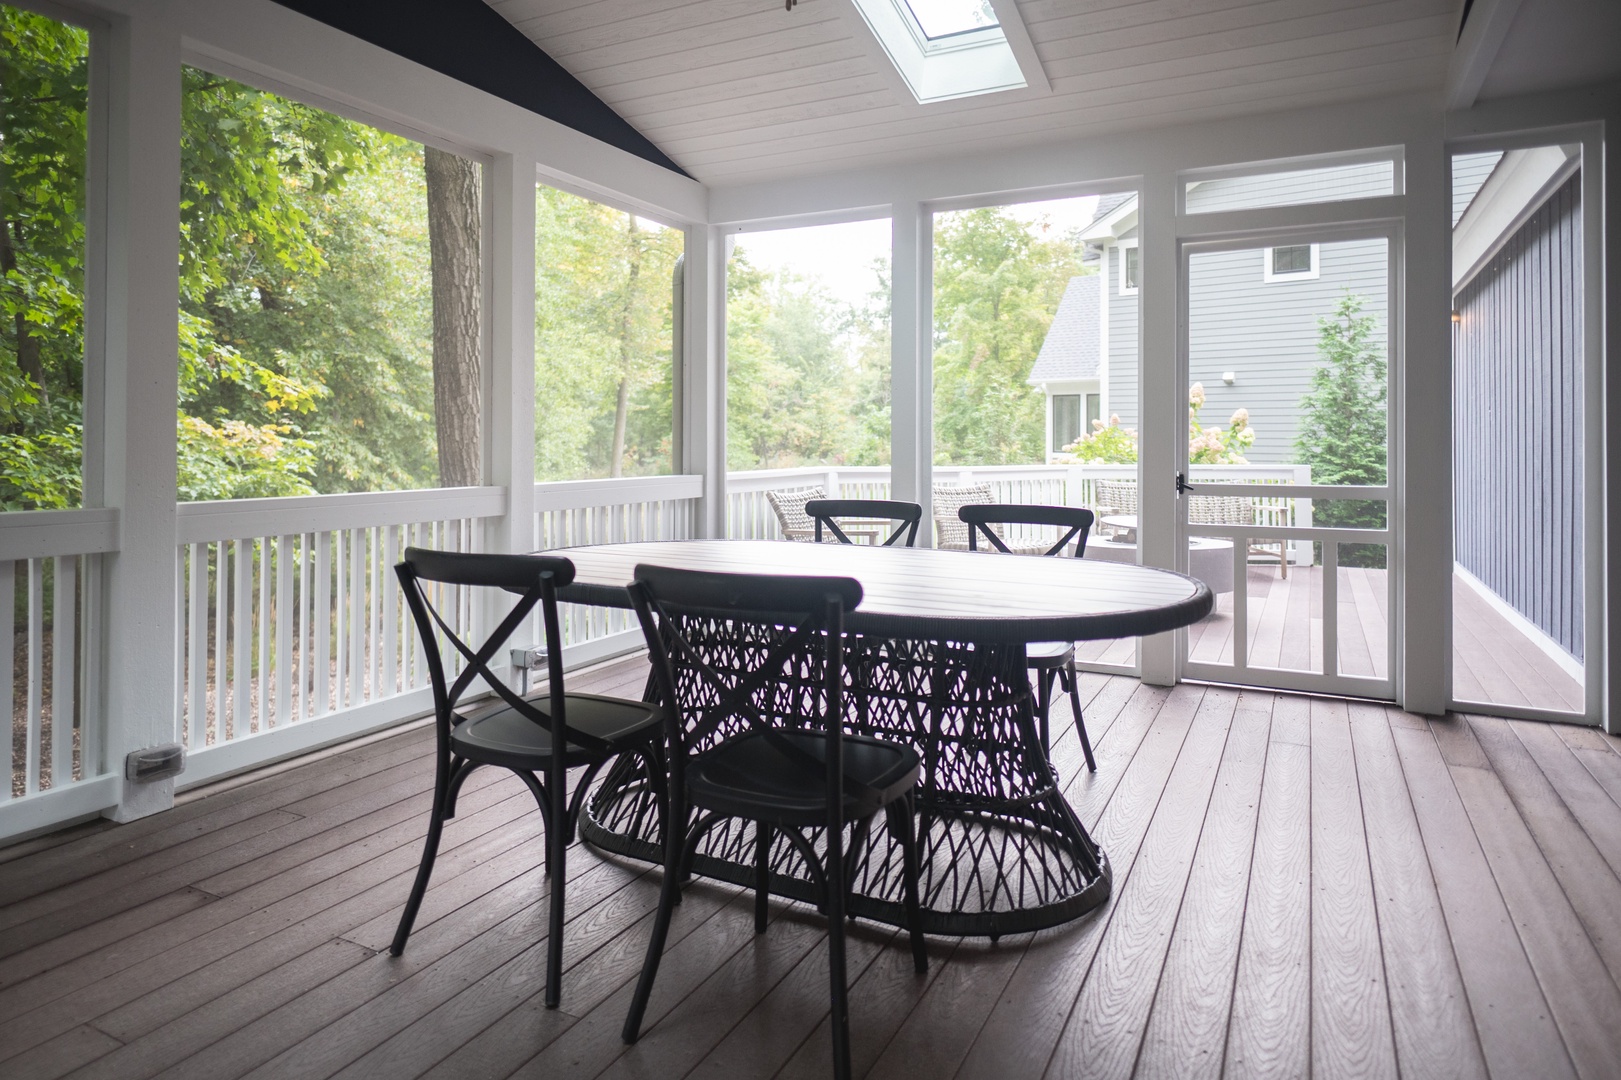 Enjoy a meal on the screened-in porch